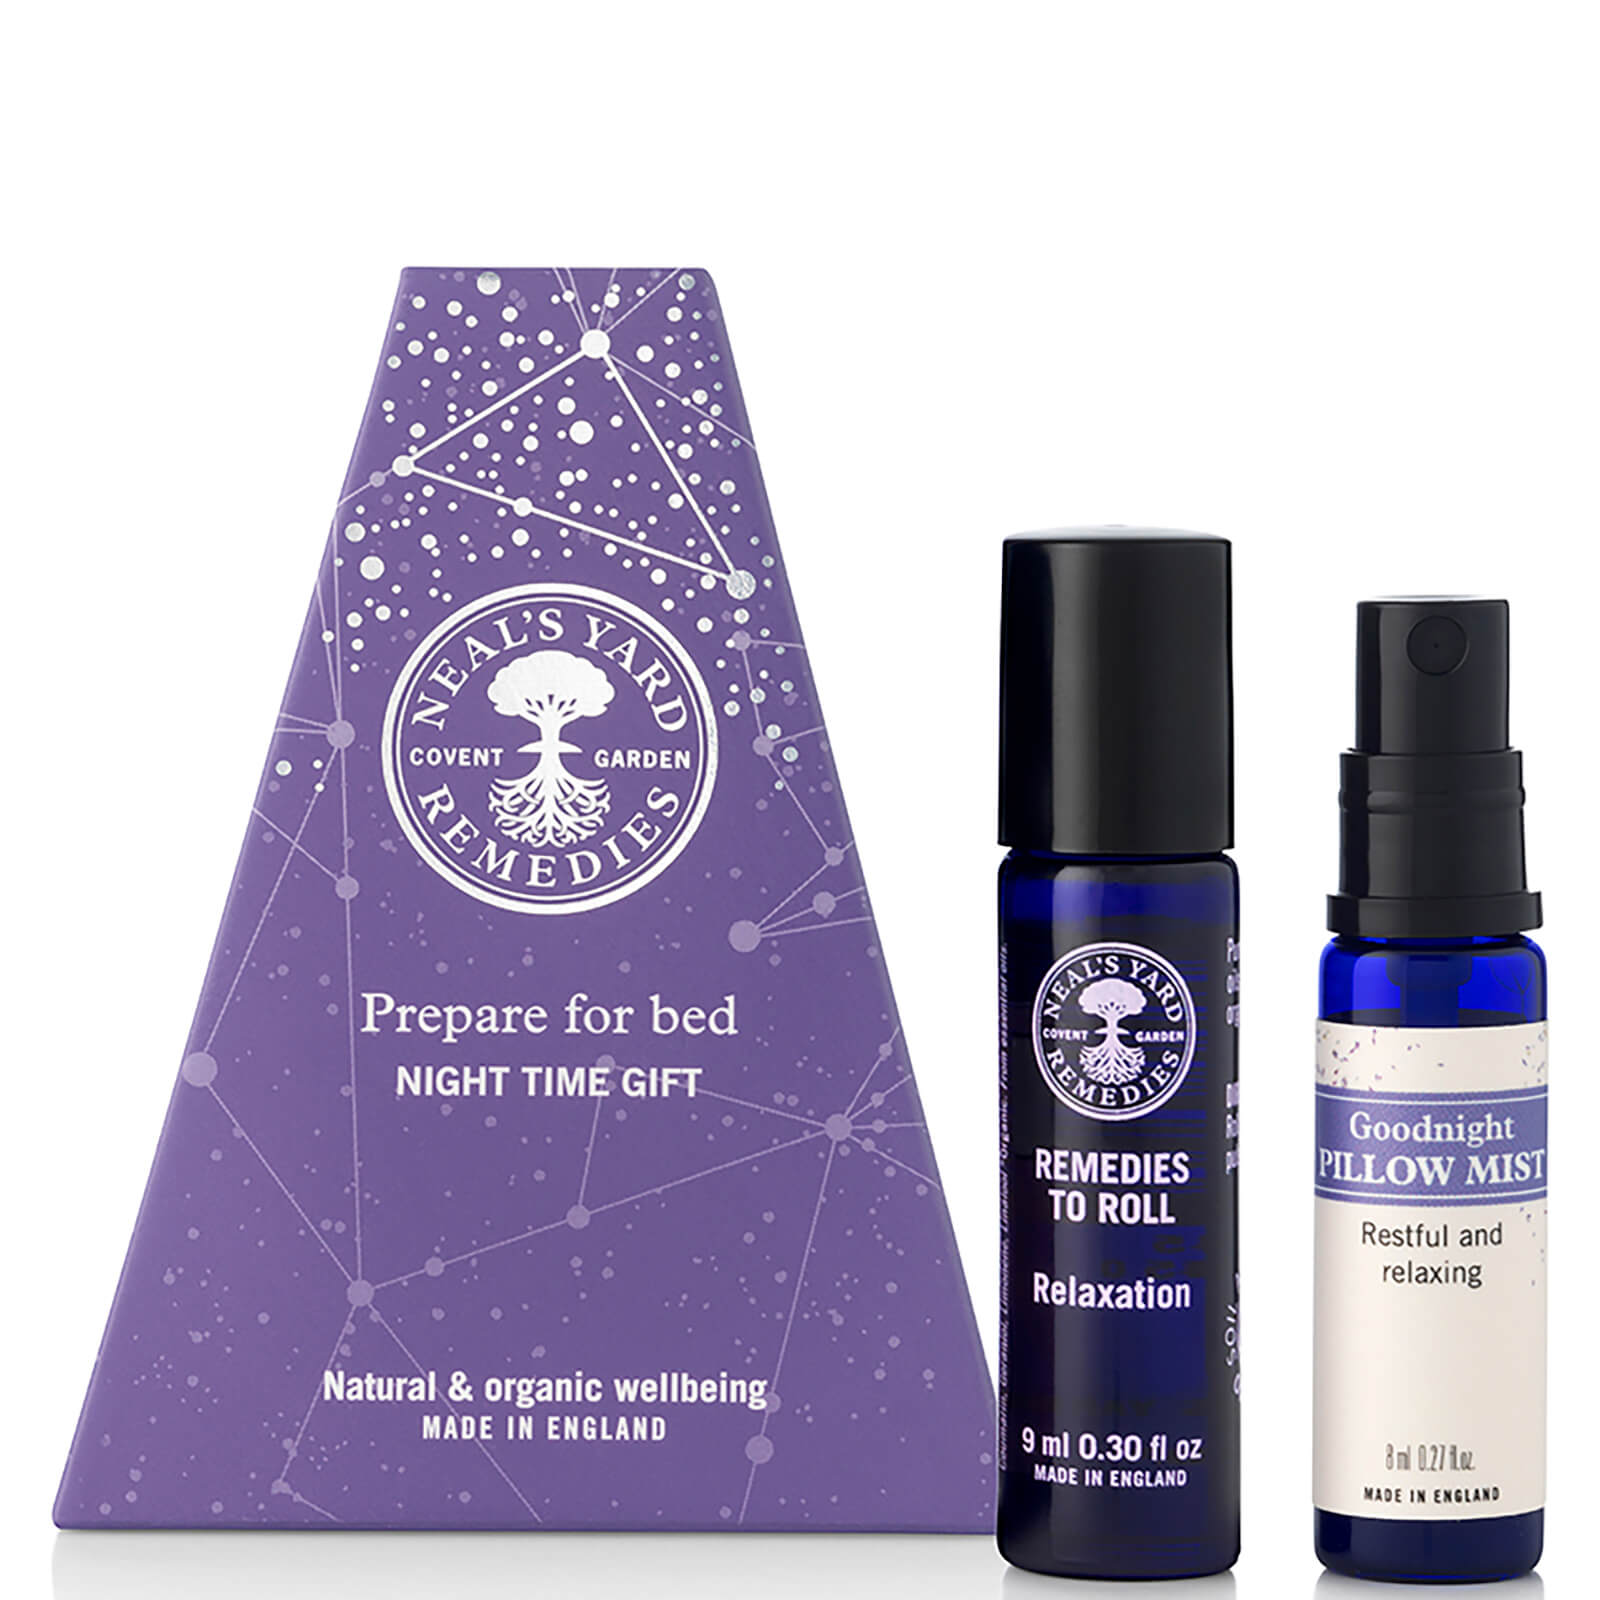 Neal's Yard Remedies Prepare for Bed Night Time Gift